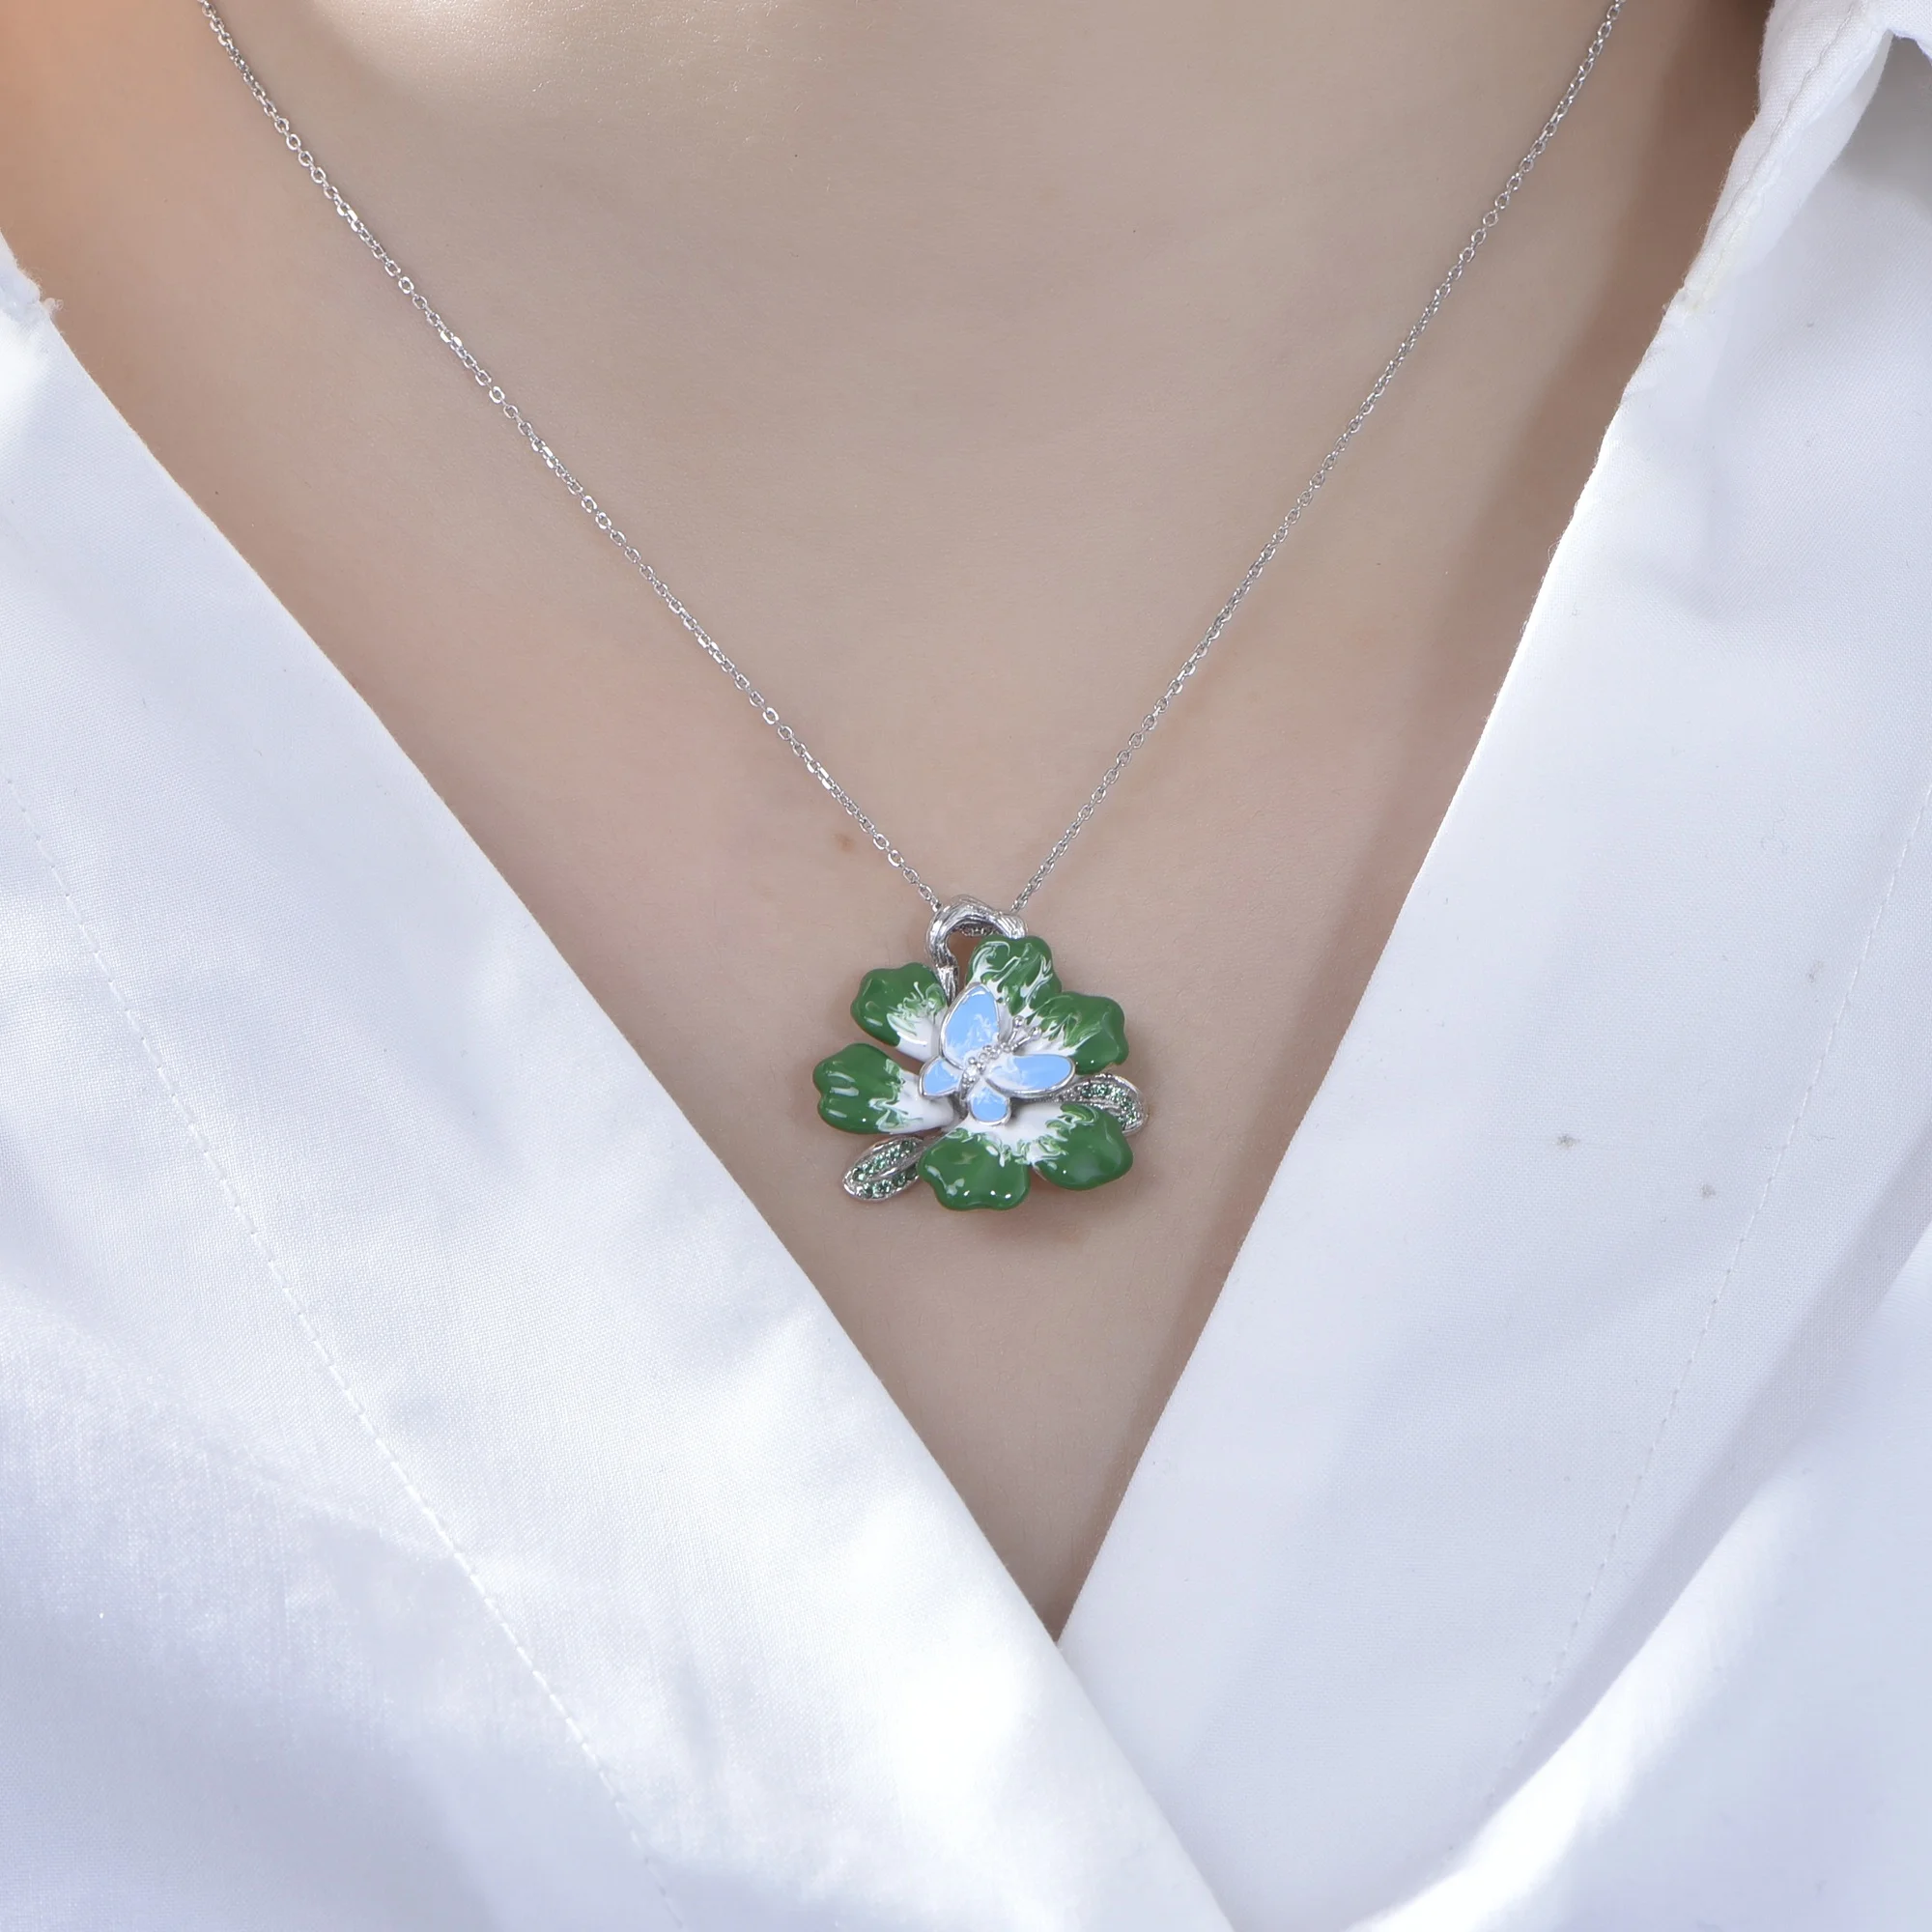 high-end jewelry set ladies jewelry set wedding birth flower ring necklace earrings lotus flower ring pendant necklace earrings